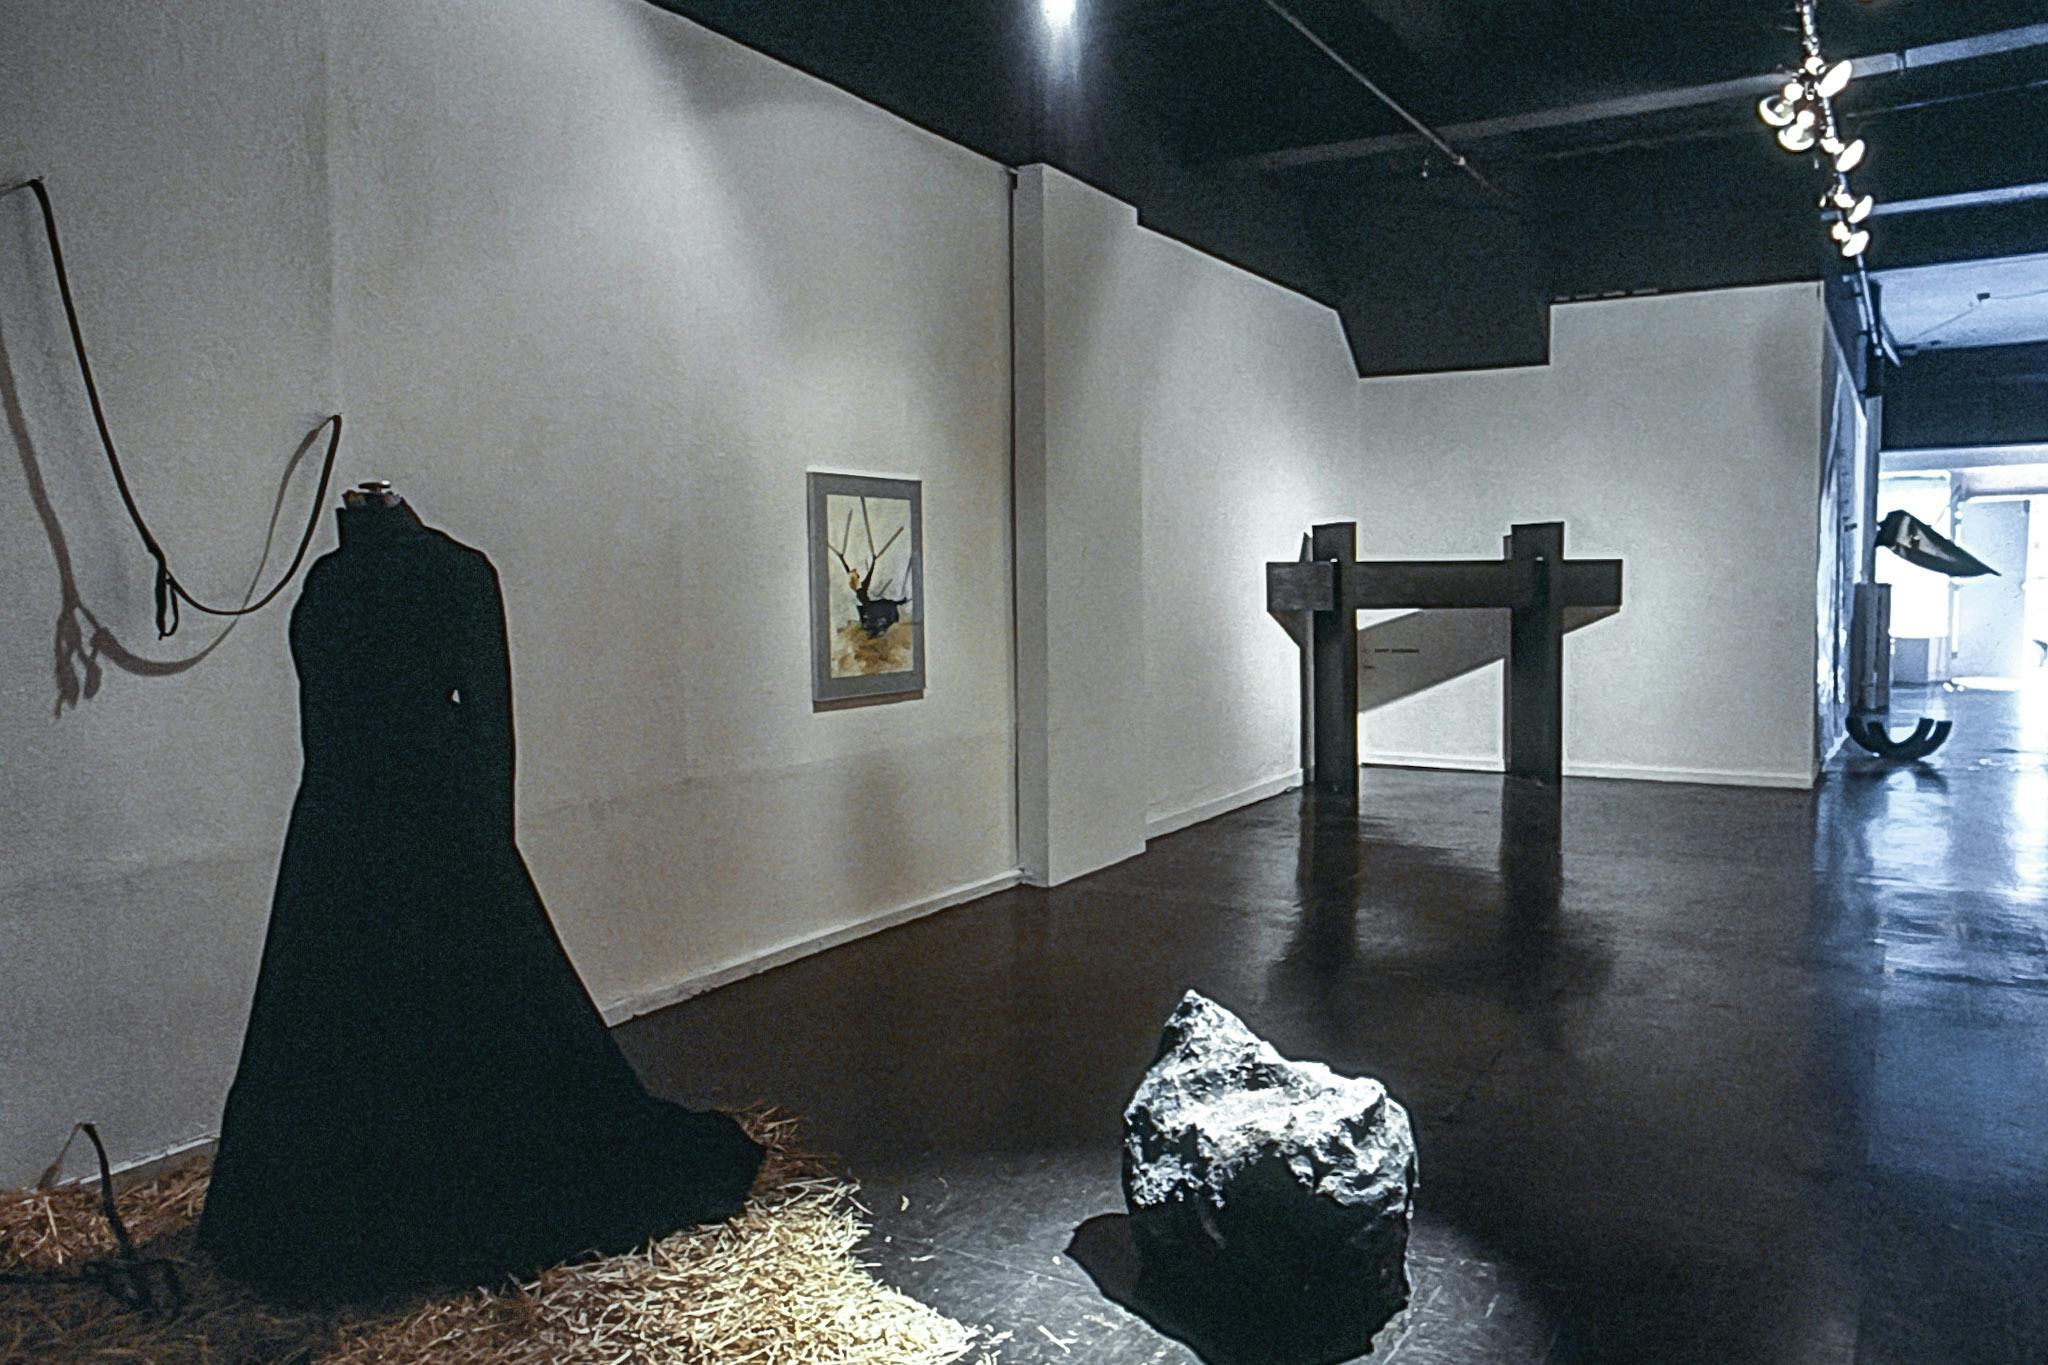 Several artworks in the corner of a gallery. The works include a black dress standing on hay, a rock, a small painting, and a small, black wooden arch with text on the wall behind it.